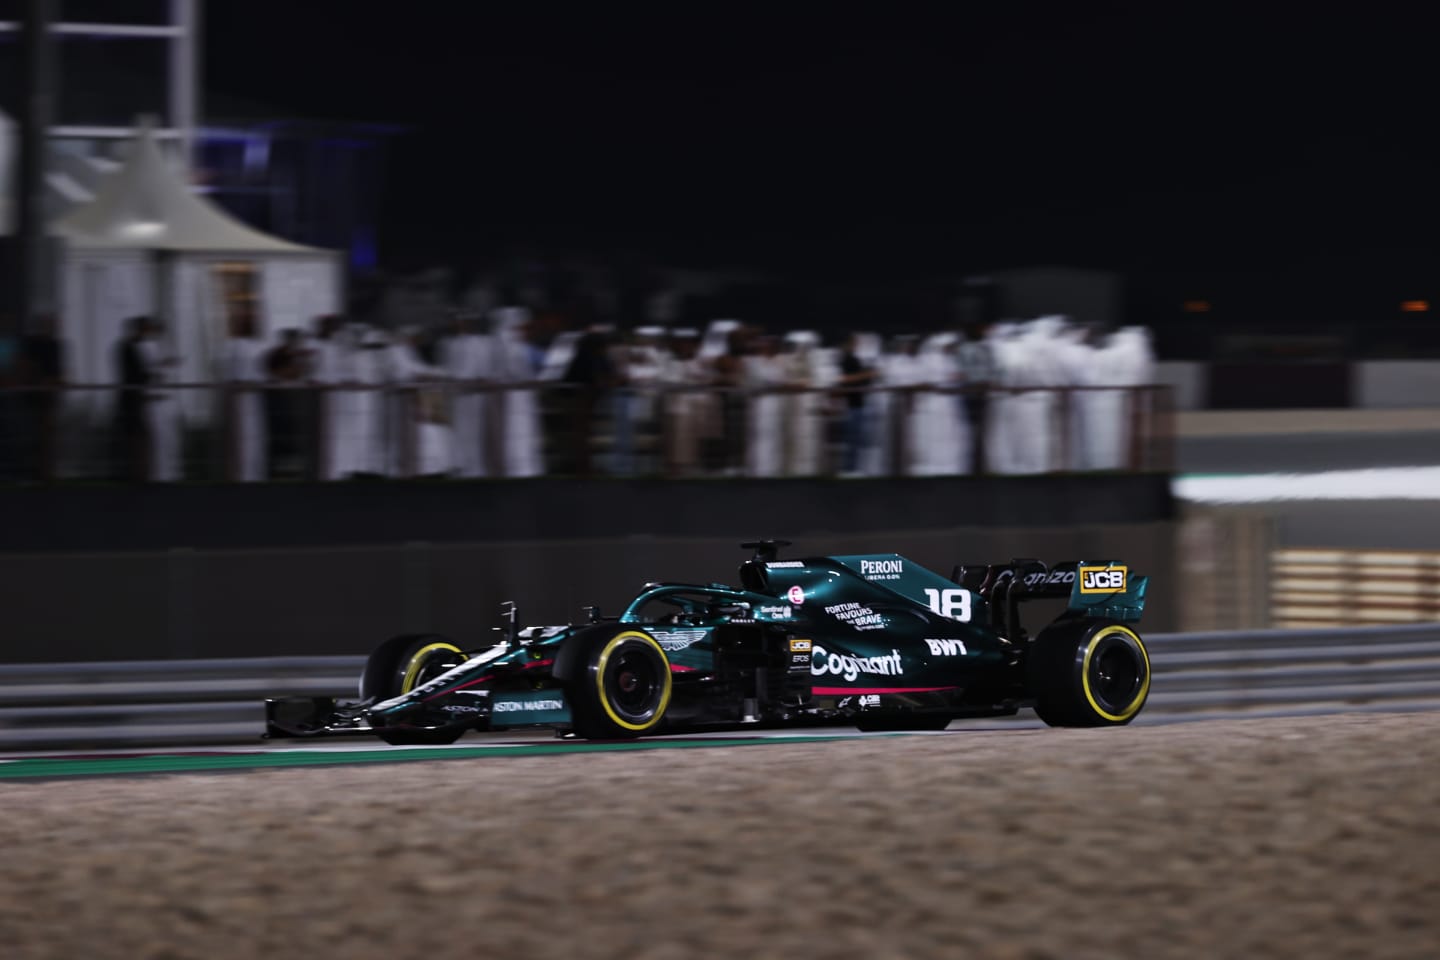 DOHA, QATAR - NOVEMBER 21: Lance Stroll of Canada driving the (18) Aston Martin AMR21 Mercedes during the F1 Grand Prix of Qatar at Losail International Circuit on November 21, 2021 in Doha, Qatar. (Photo by Lars Baron/Getty Images)